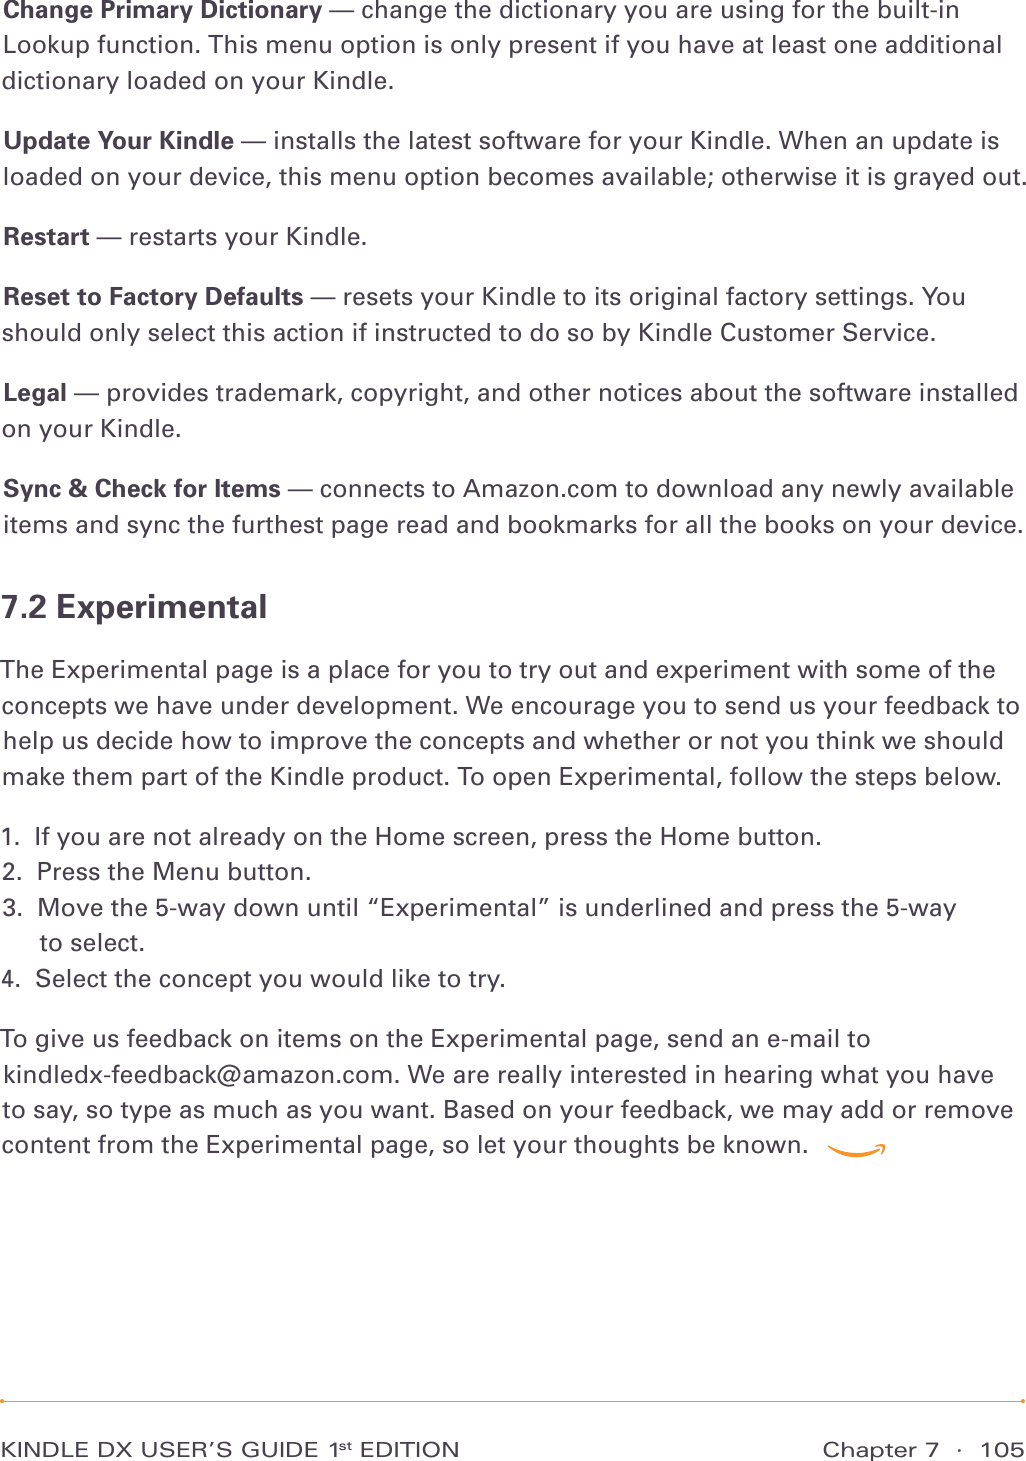 Chapter 7  ·  105KINDLE DX USER’S GUIDE 1st EDITIONChange Primary Dictionary — change the dictionary you are using for the built-in Lookup function. This menu option is only present if you have at least one additional dictionary loaded on your Kindle.Update Your Kindle — installs the latest software for your Kindle. When an update is loaded on your device, this menu option becomes available; otherwise it is grayed out.Restart — restarts your Kindle.Reset to Factory Defaults — resets your Kindle to its original factory settings. You should only select this action if instructed to do so by Kindle Customer Service.Legal — provides trademark, copyright, and other notices about the software installed on your Kindle.Sync &amp; Check for Items — connects to Amazon.com to download any newly available items and sync the furthest page read and bookmarks for all the books on your device.7.2 ExperimentalThe Experimental page is a place for you to try out and experiment with some of the concepts we have under development. We encourage you to send us your feedback to help us decide how to improve the concepts and whether or not you think we should make them part of the Kindle product. To open Experimental, follow the steps below.1.  If you are not already on the Home screen, press the Home button. 2.  Press the Menu button. 3.   Move the 5-way down until “Experimental” is underlined and press the 5-way  to select. 4.  Select the concept you would like to try. To give us feedback on items on the Experimental page, send an e-mail to  kindledx-feedback@amazon.com. We are really interested in hearing what you have to say, so type as much as you want. Based on your feedback, we may add or remove content from the Experimental page, so let your thoughts be known.